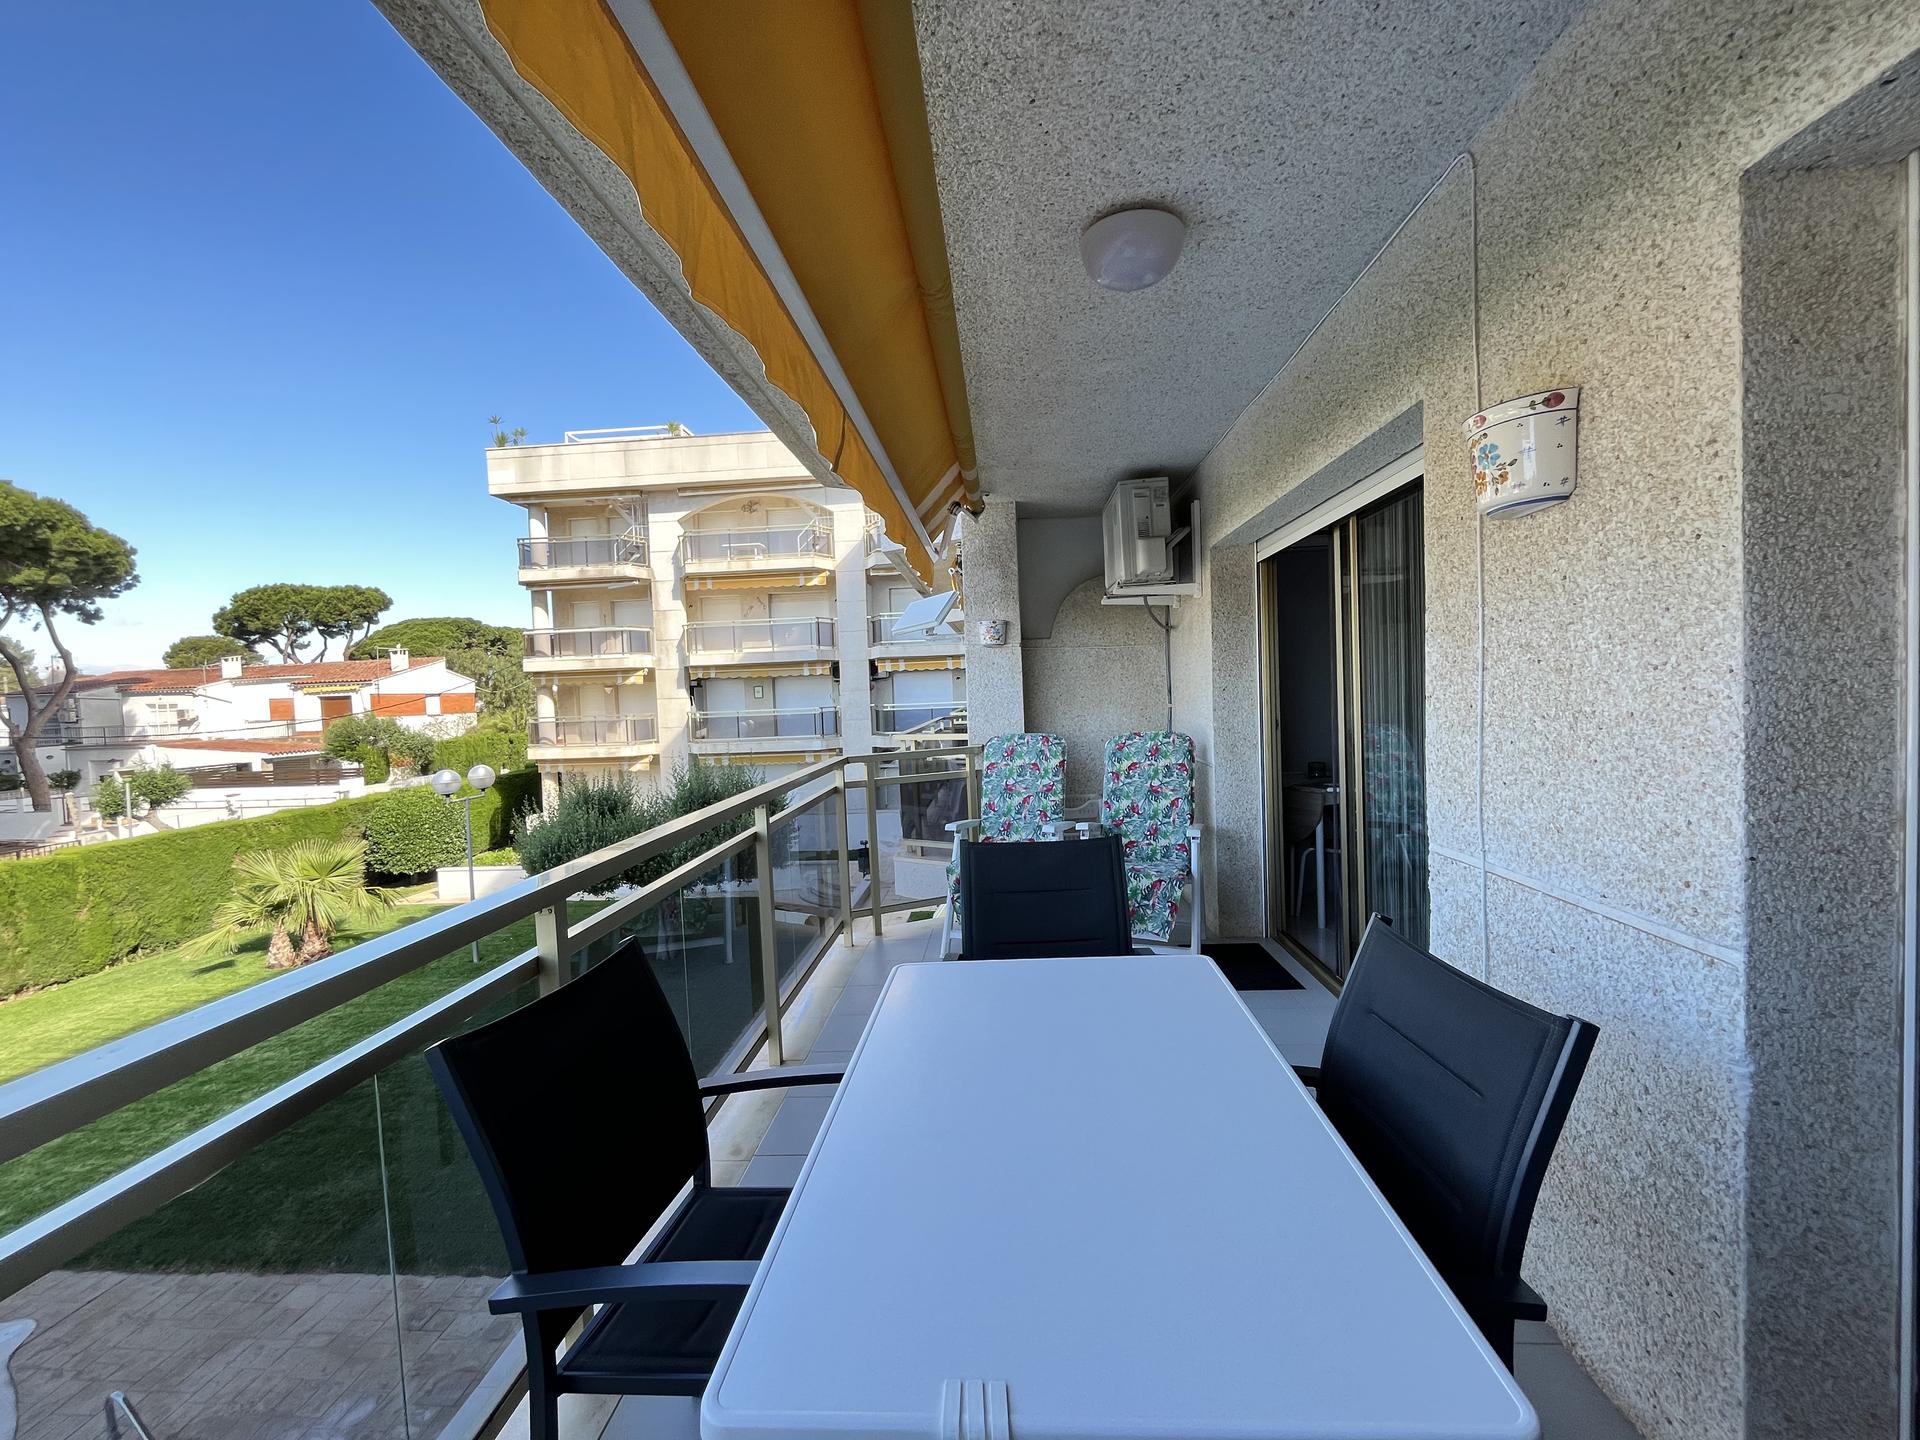 Appartement -
                                            Cambrils -
                                            1 chambres -
                                            4 occupants